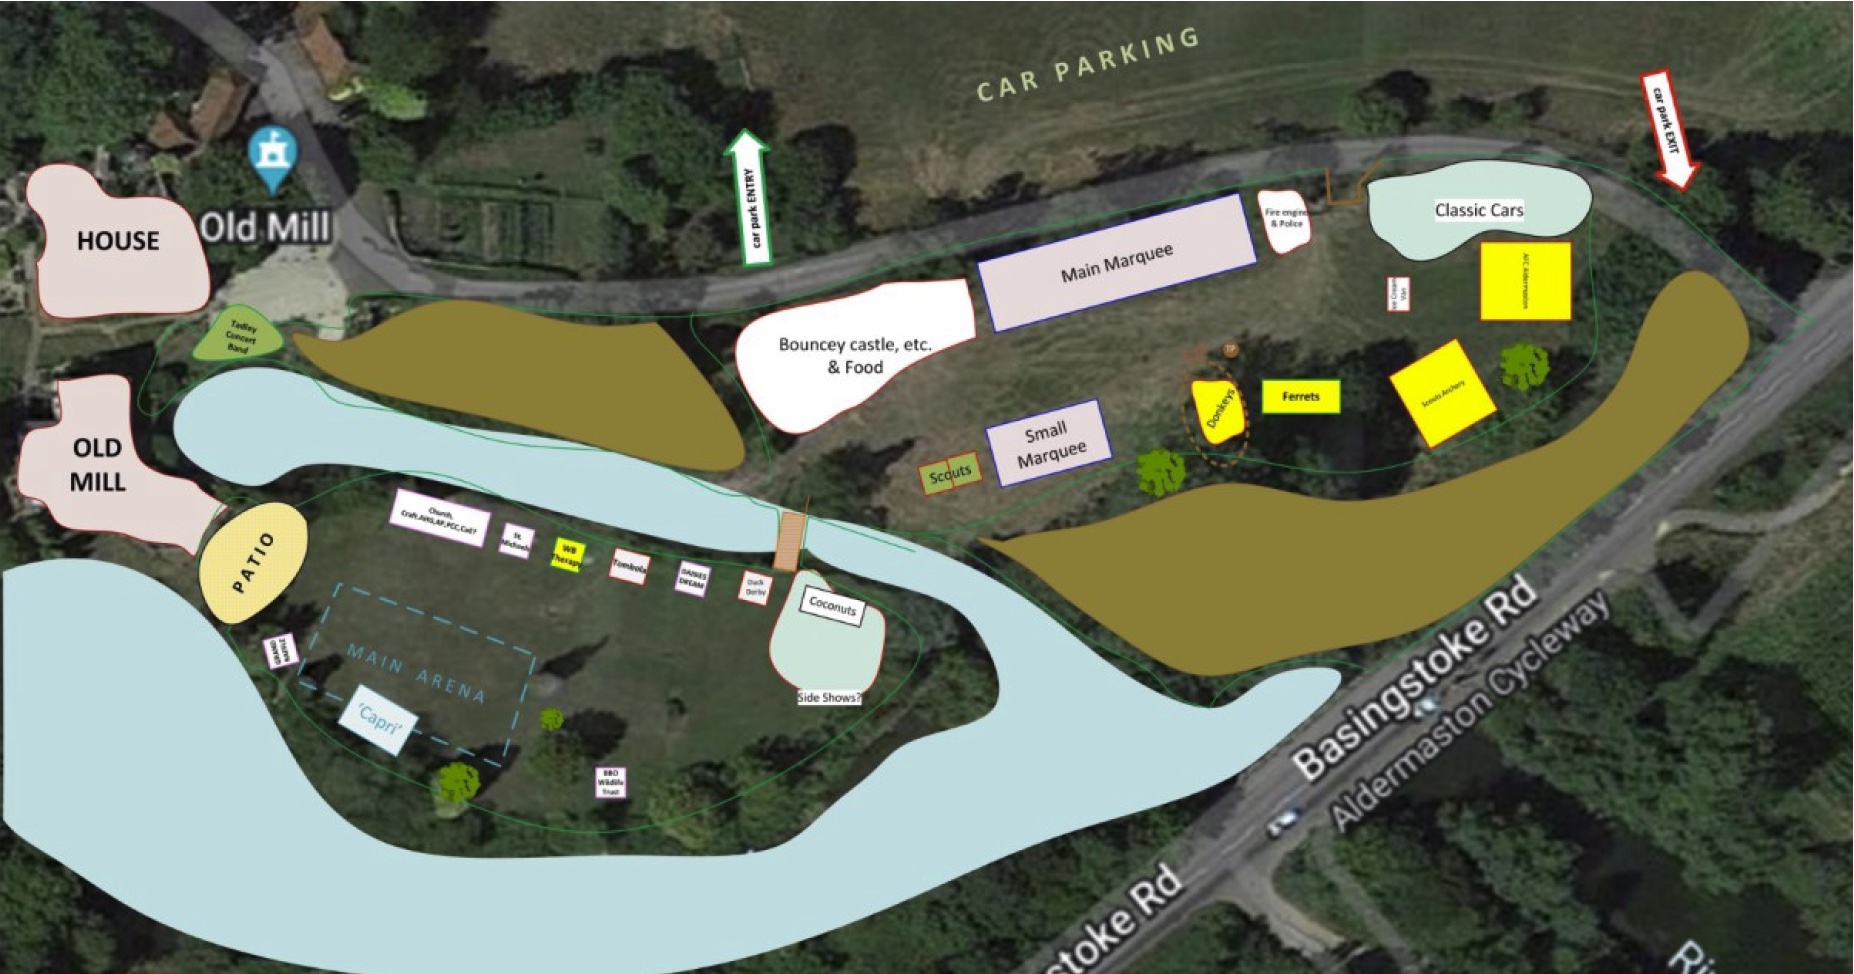 Show Site Map